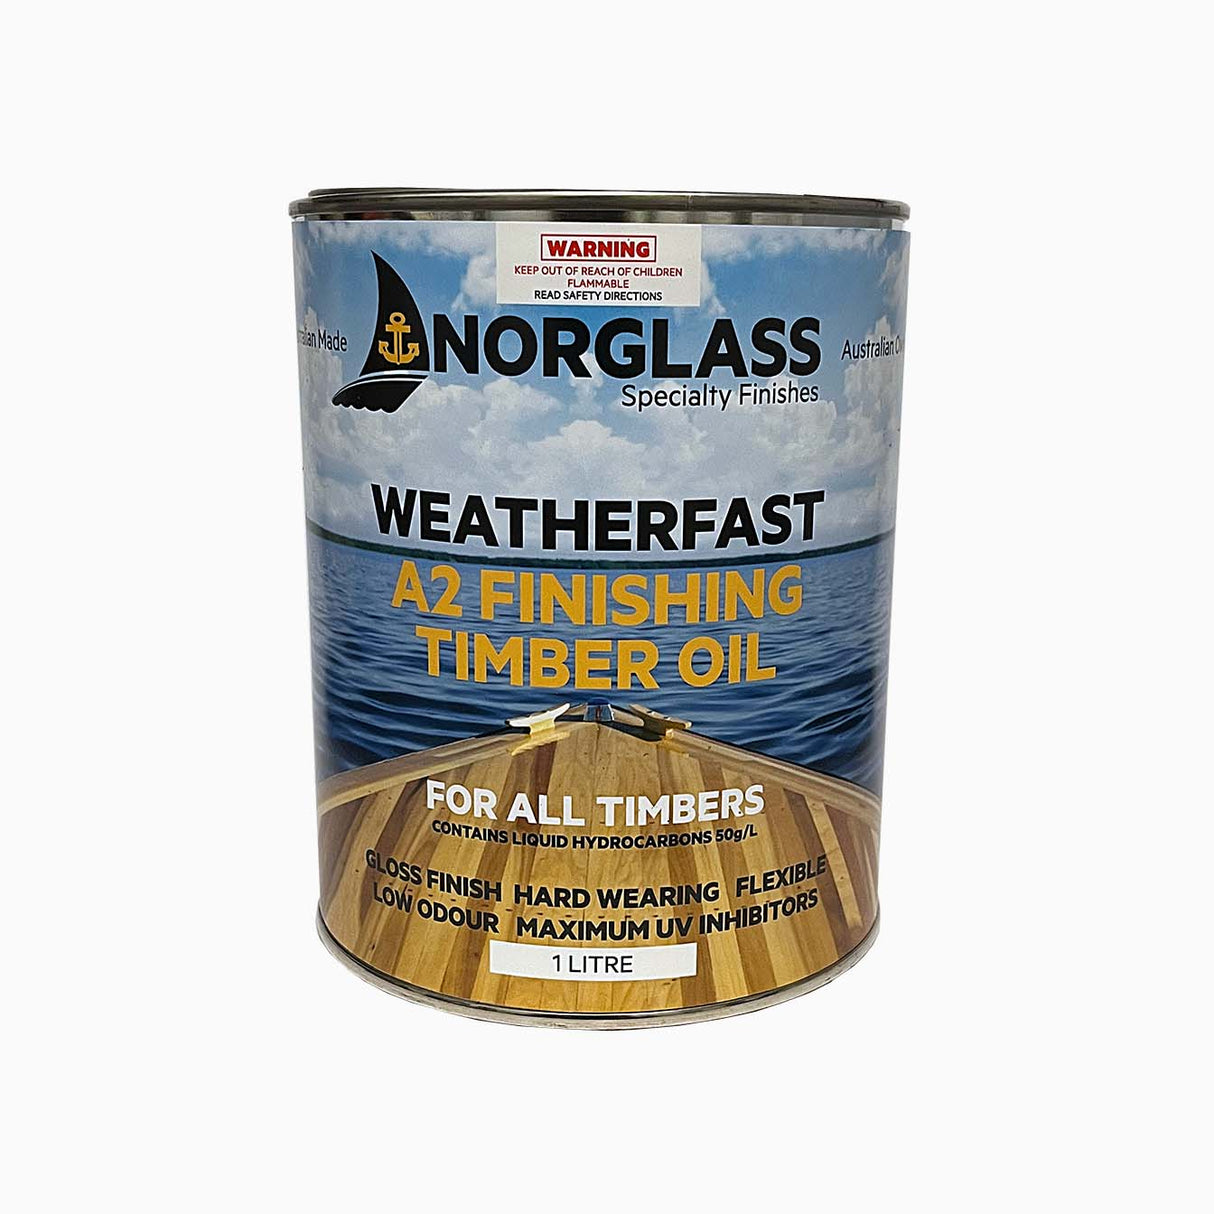 Norglass A2 Finishing Timber Oil Various Sizes